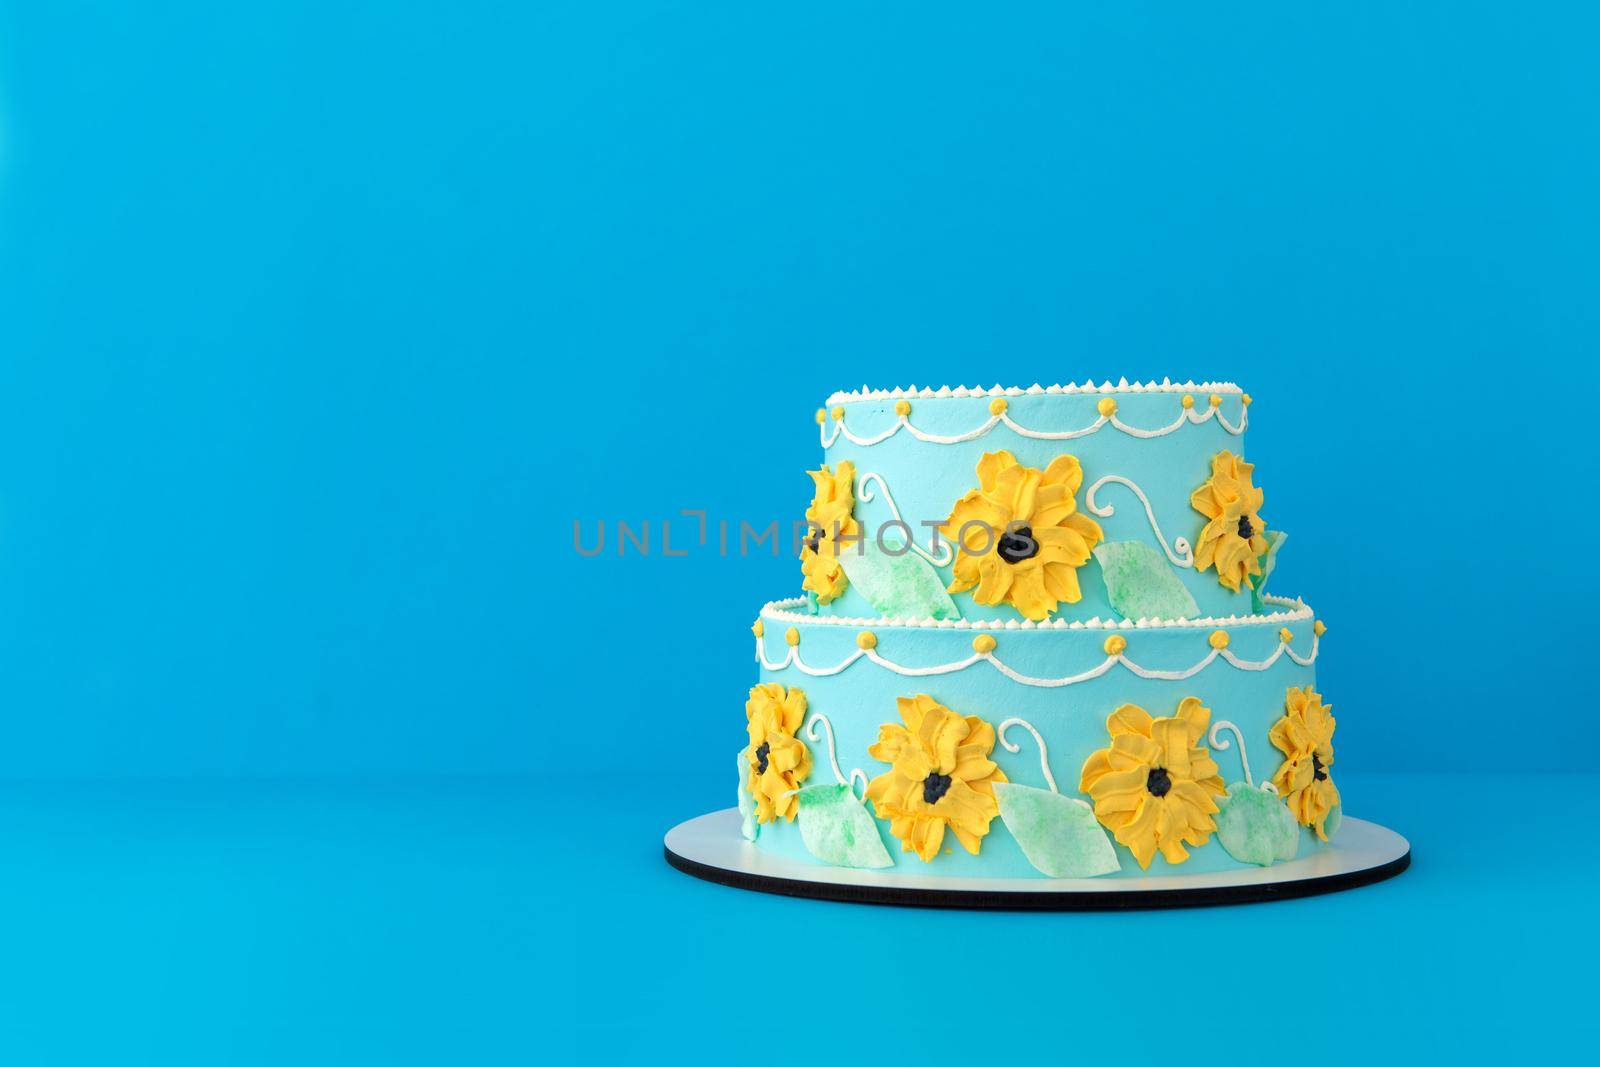 Festive cake with colorful floral decor blue background by Demkat